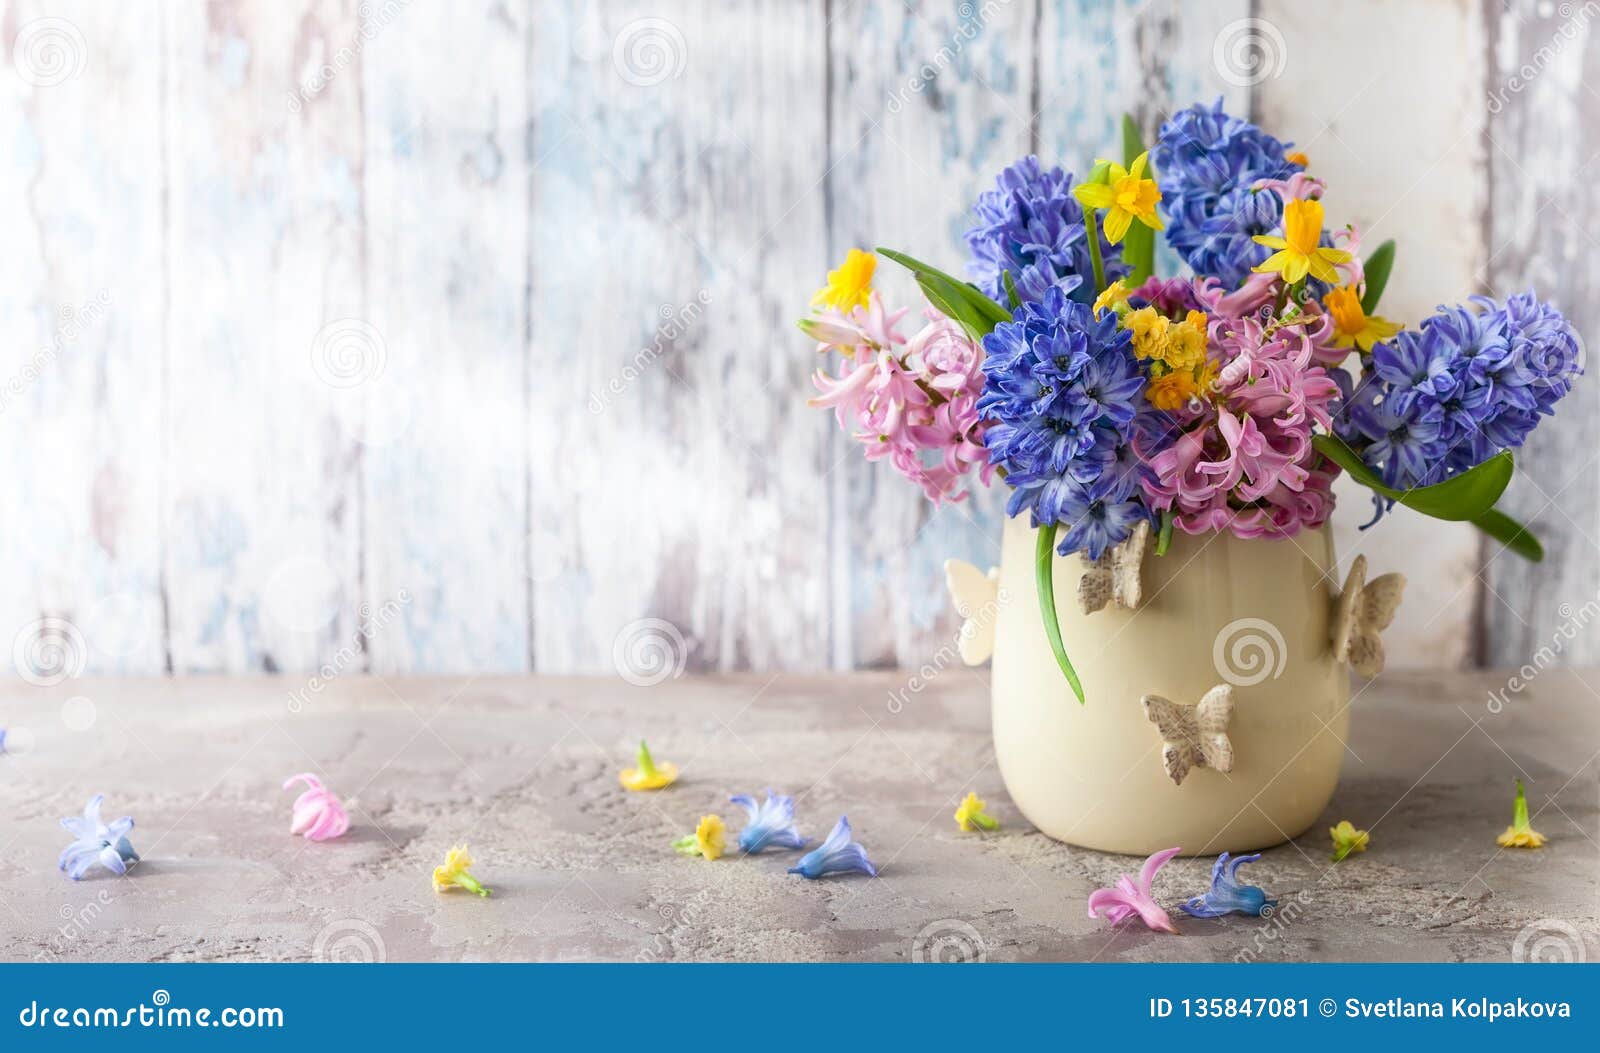 spring flowers in vase for holiday